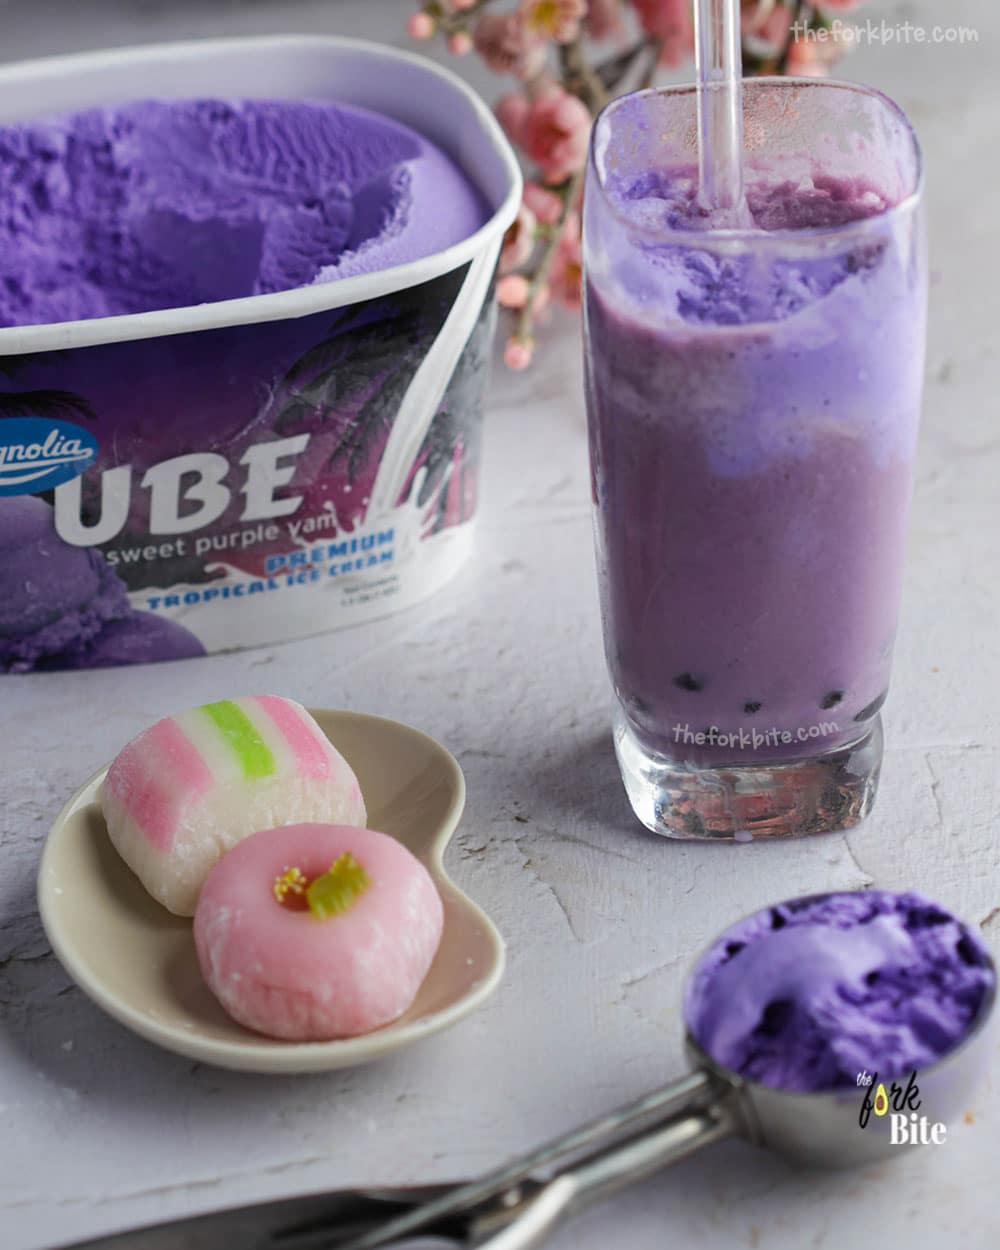 Often referred to simply as “taro milk tea,” this is an ube boba tea with milk dependent upon taro for its flavoring. It may be created using extracts or made from scratch.